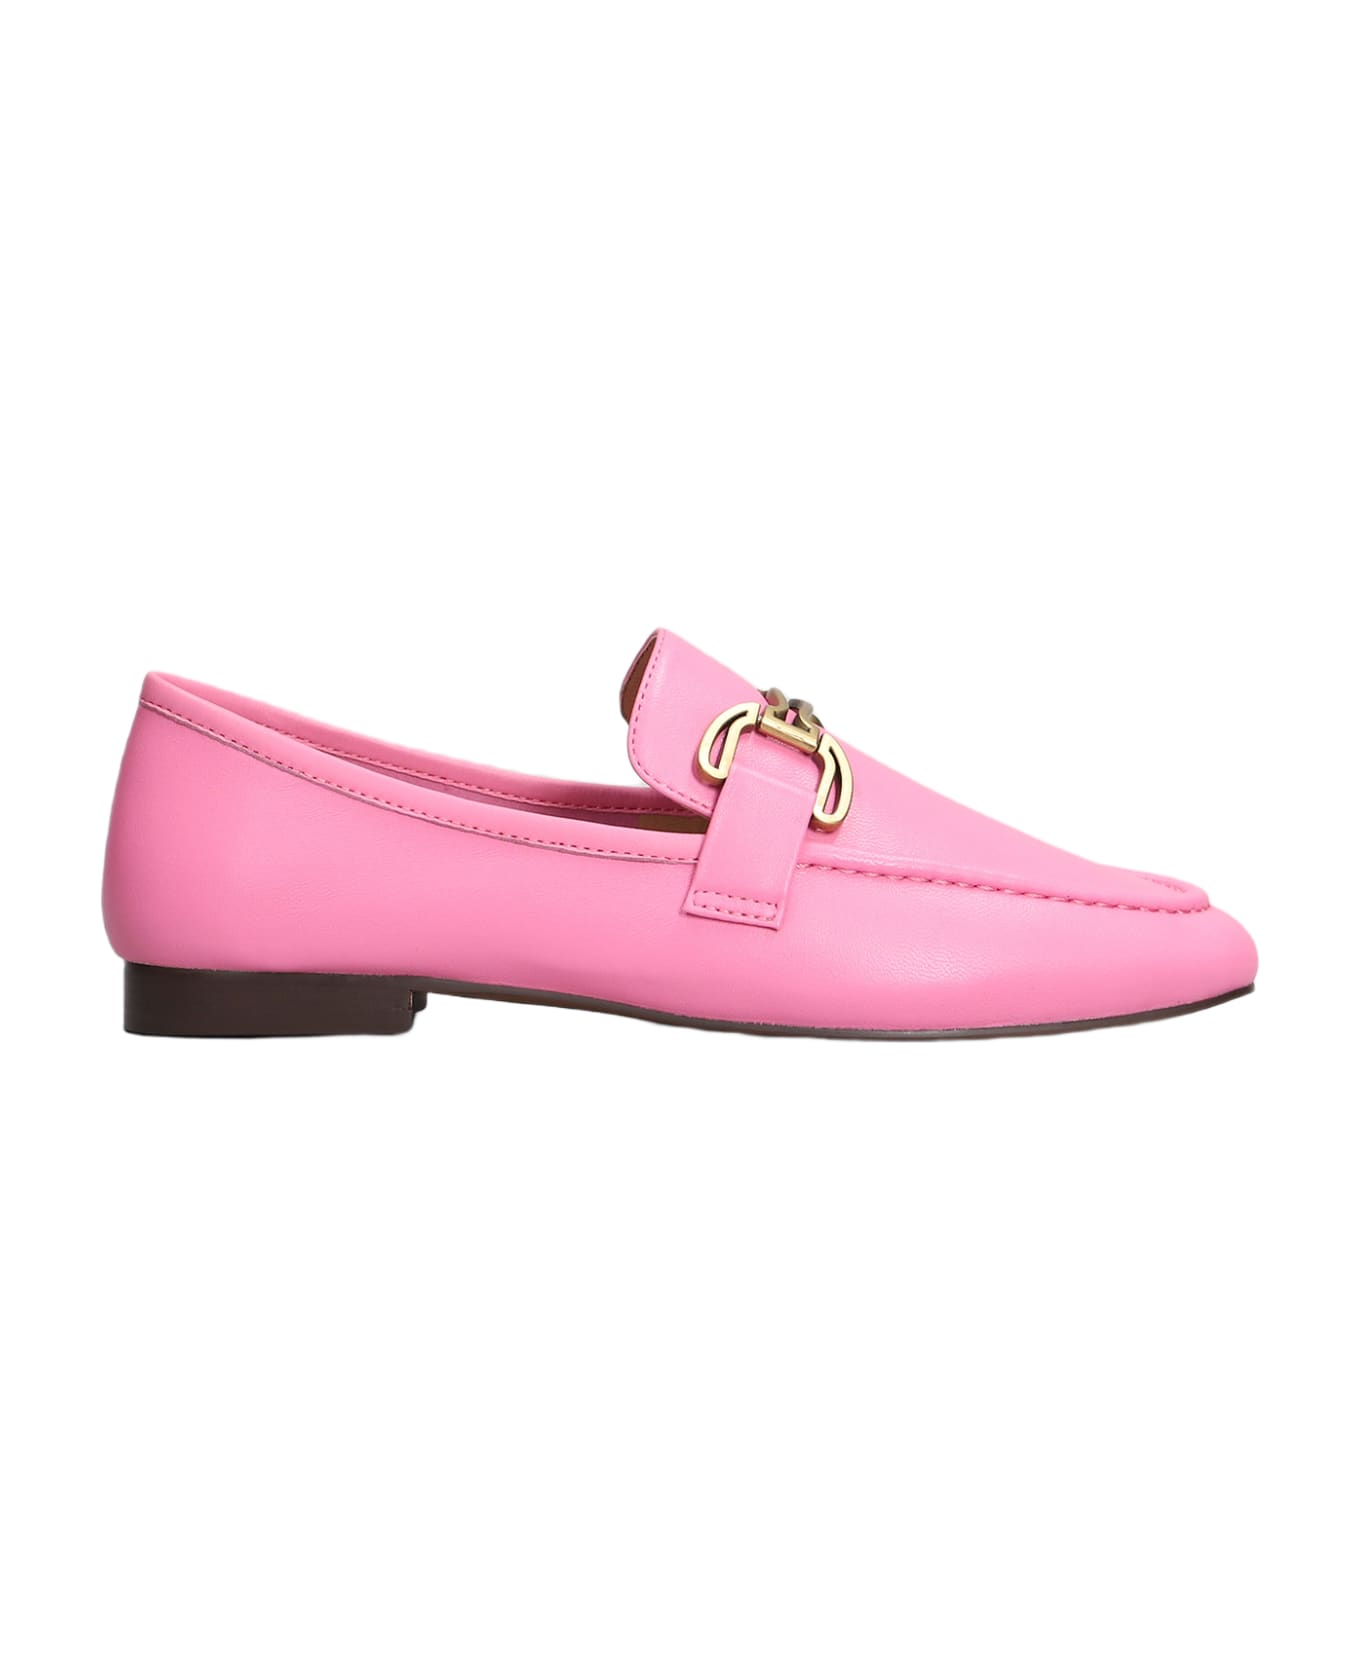 Bibi Lou Zagreb Ii Loafers In Rose-pink Leather - rose-pink